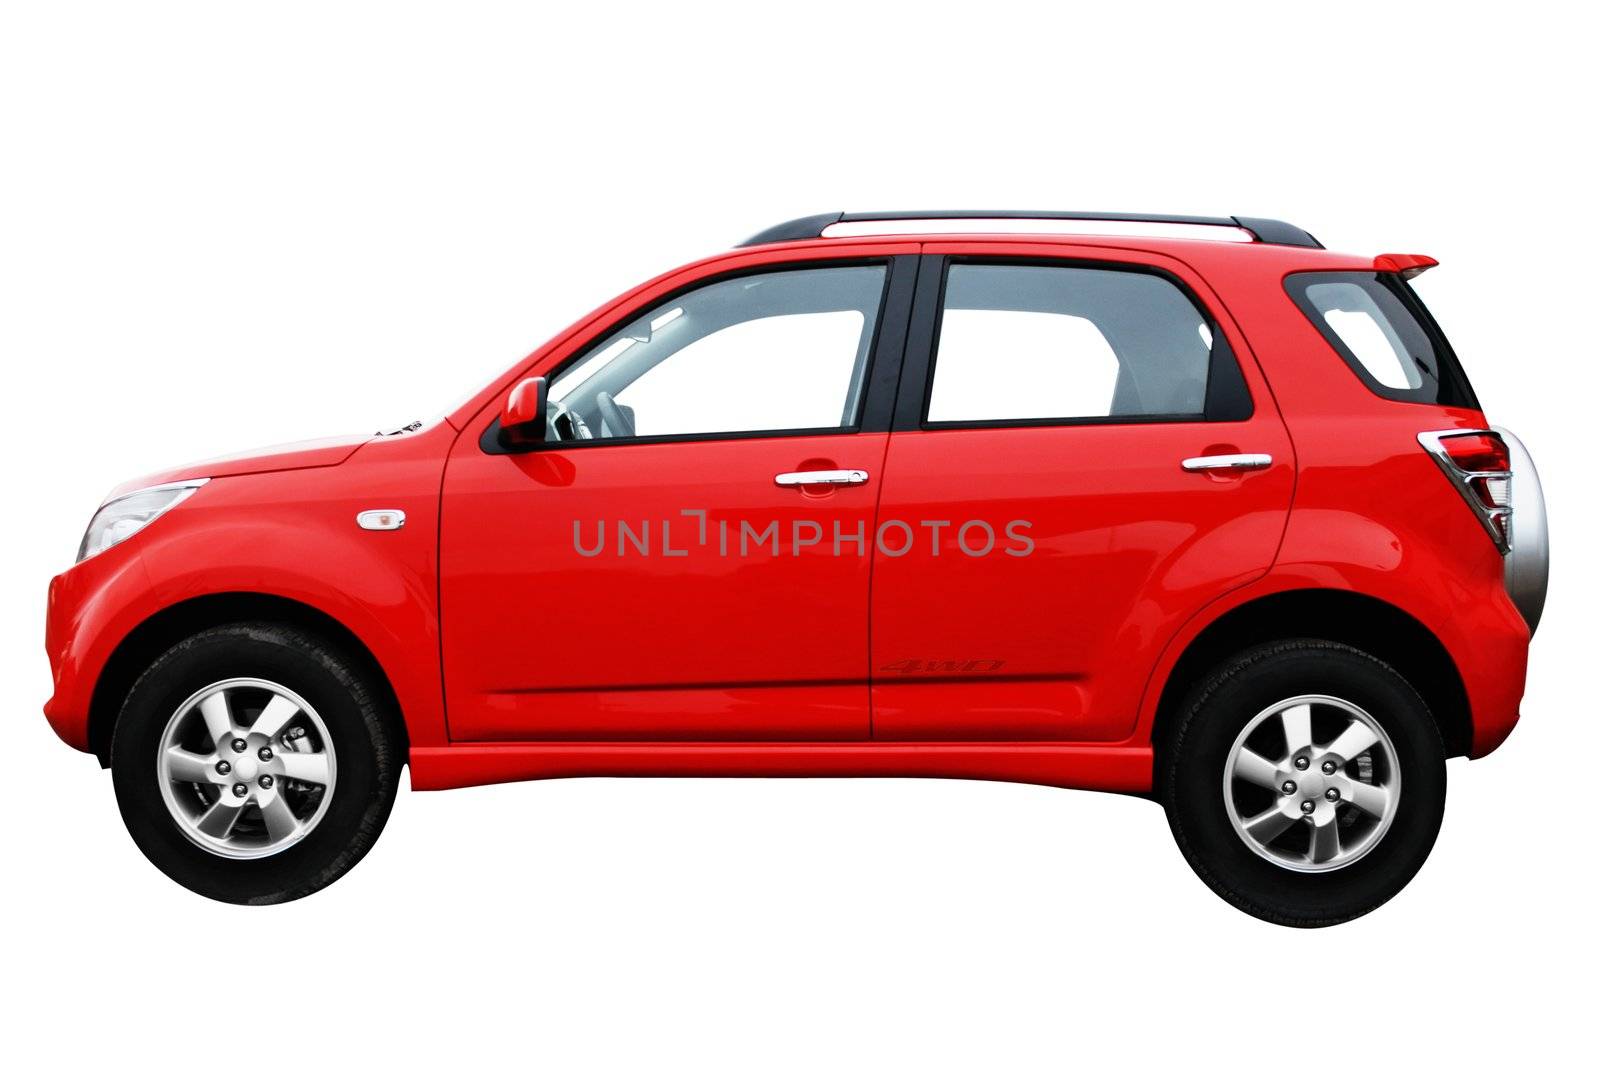 Red modern new car isolated on white background, side view